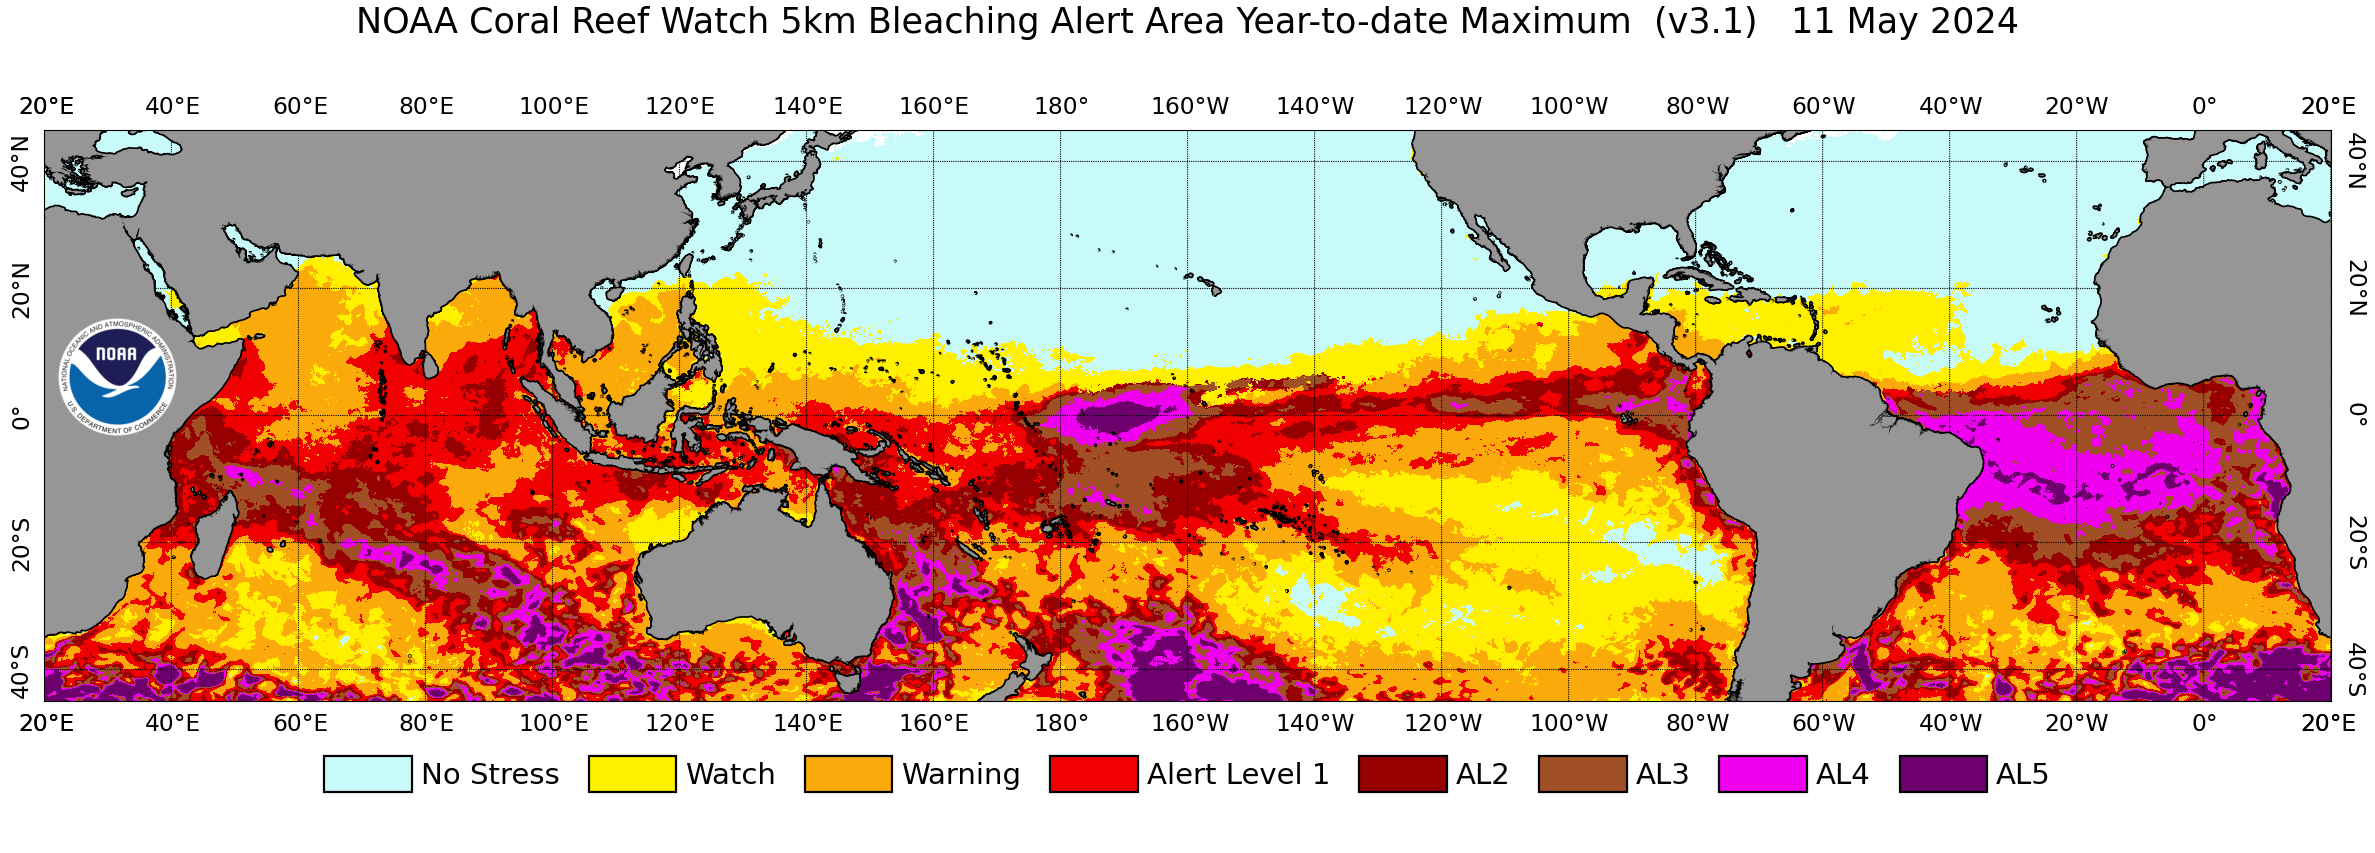 Global Year-to-date 5-km Coral Bleaching Heat Stress Alert Area image